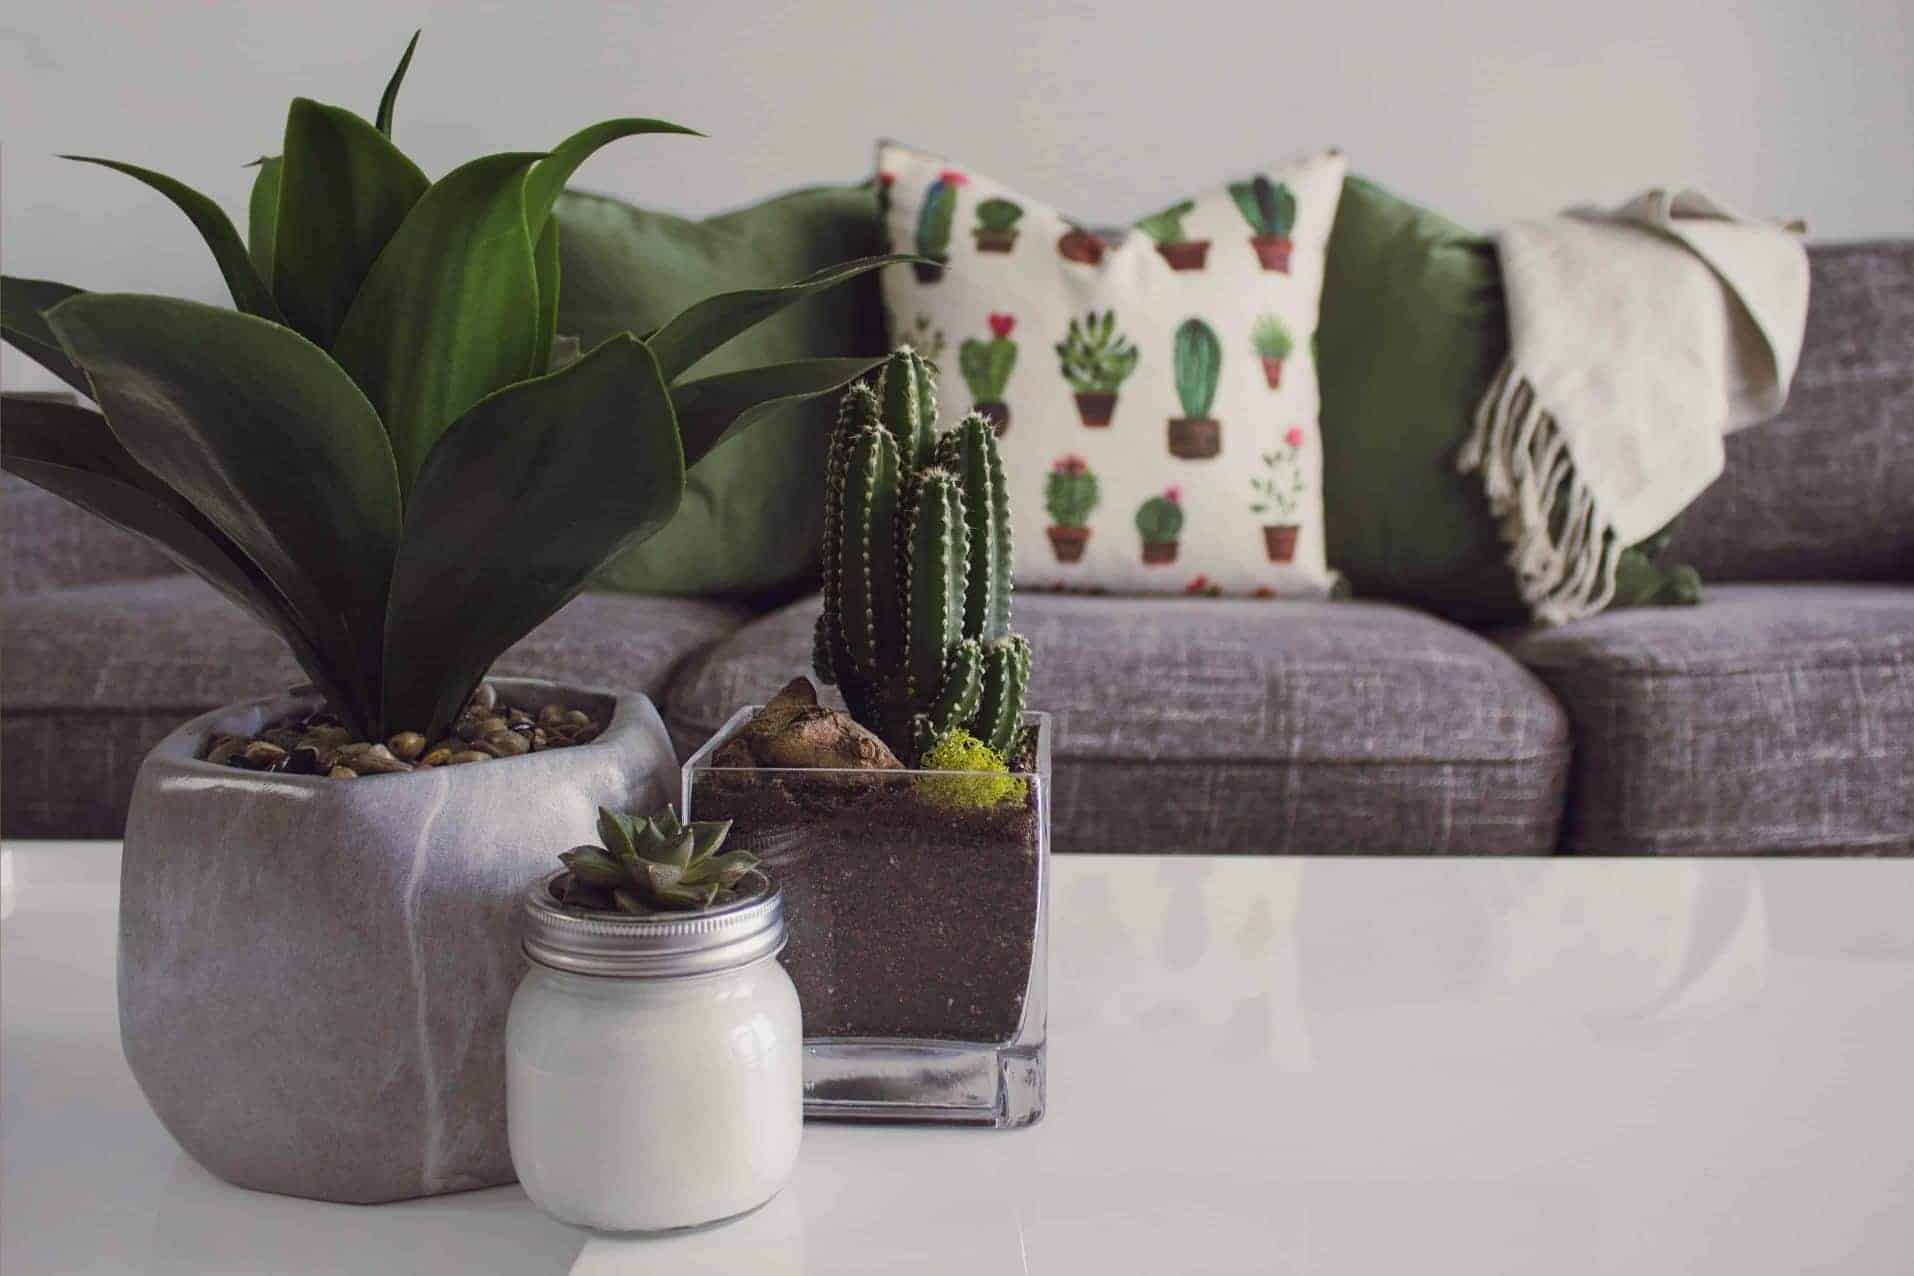 furnished room with white table and cactus plants